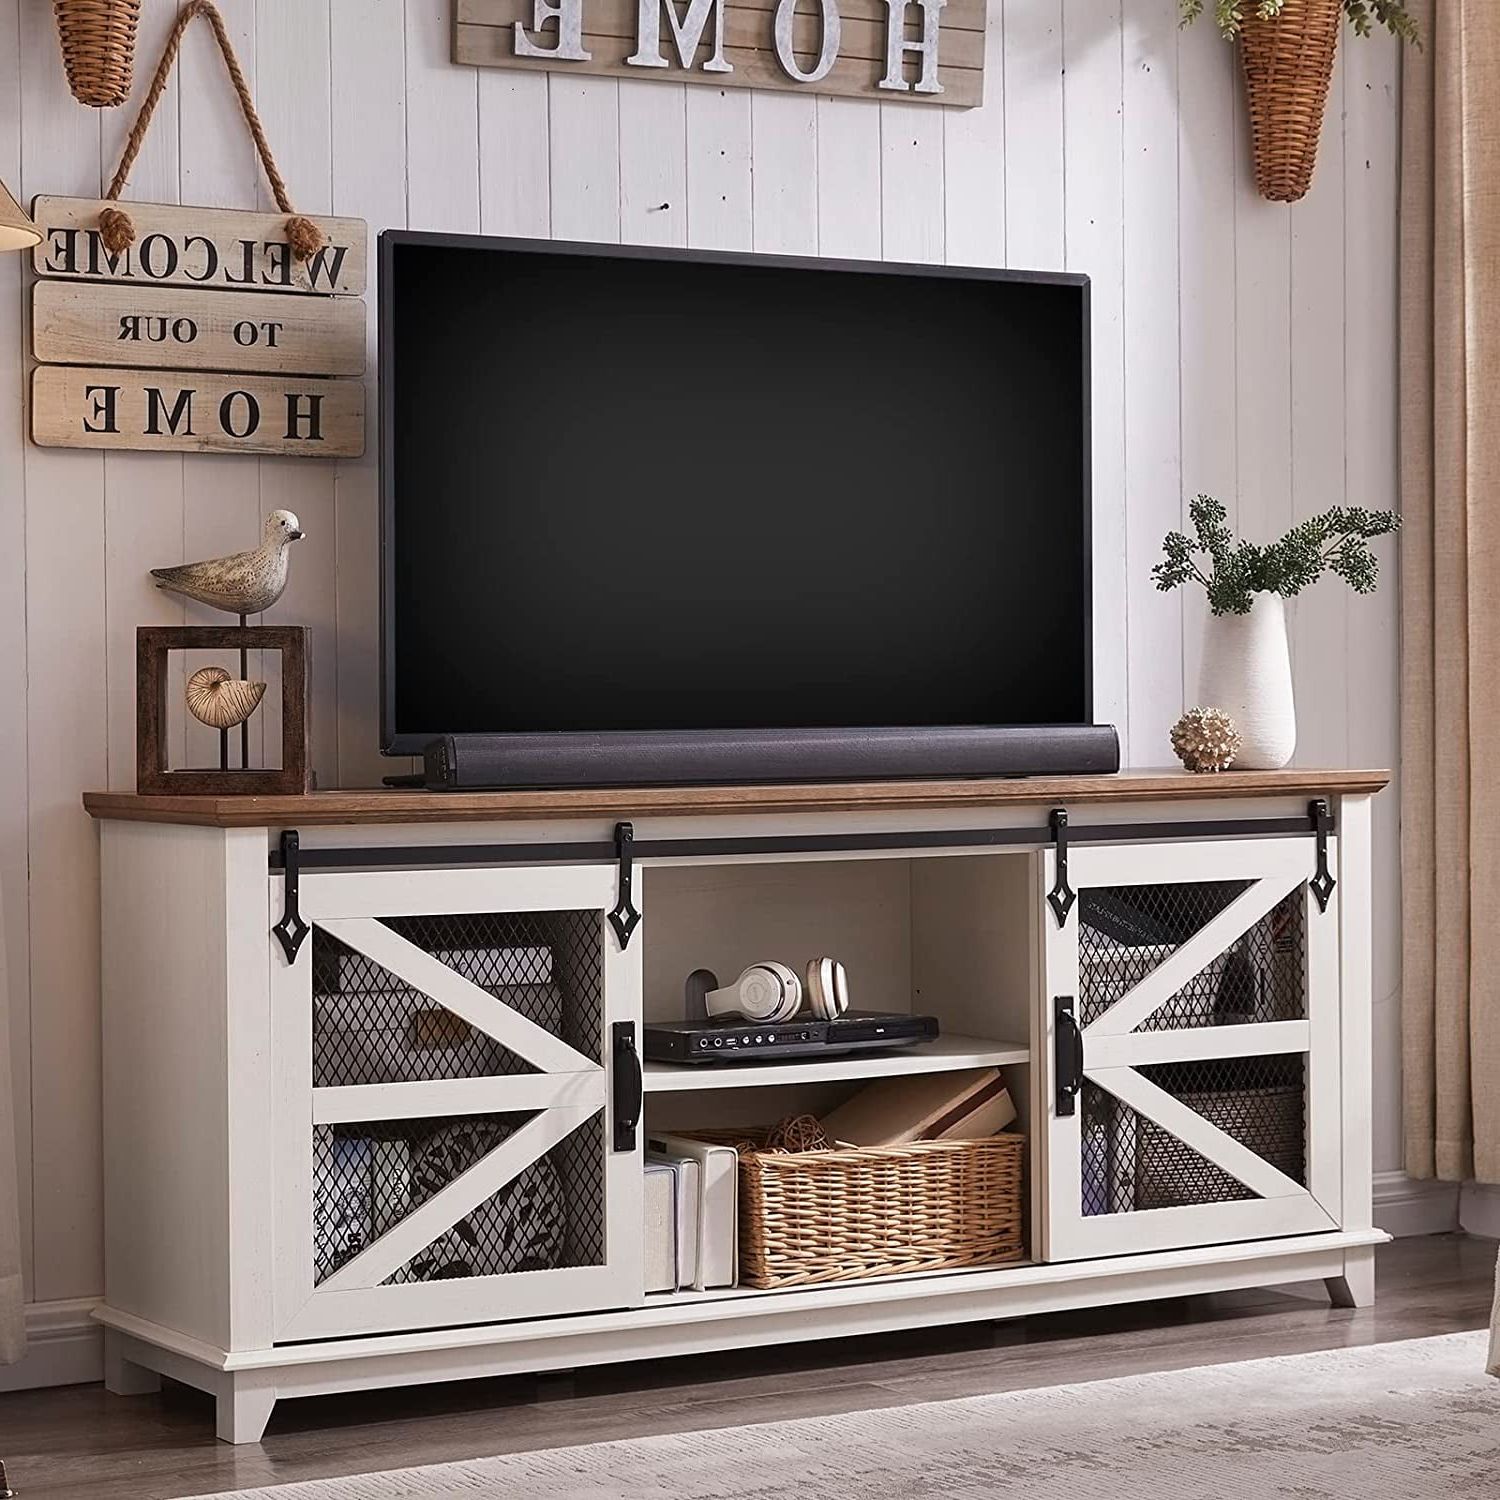 Okd Farmhouse Tv Stand For 75+ Inch Tv, Entertainment Center With  Adjustable Shelves For Living Room, Antique White – Walmart For Farmhouse Stands With Shelves (View 9 of 20)